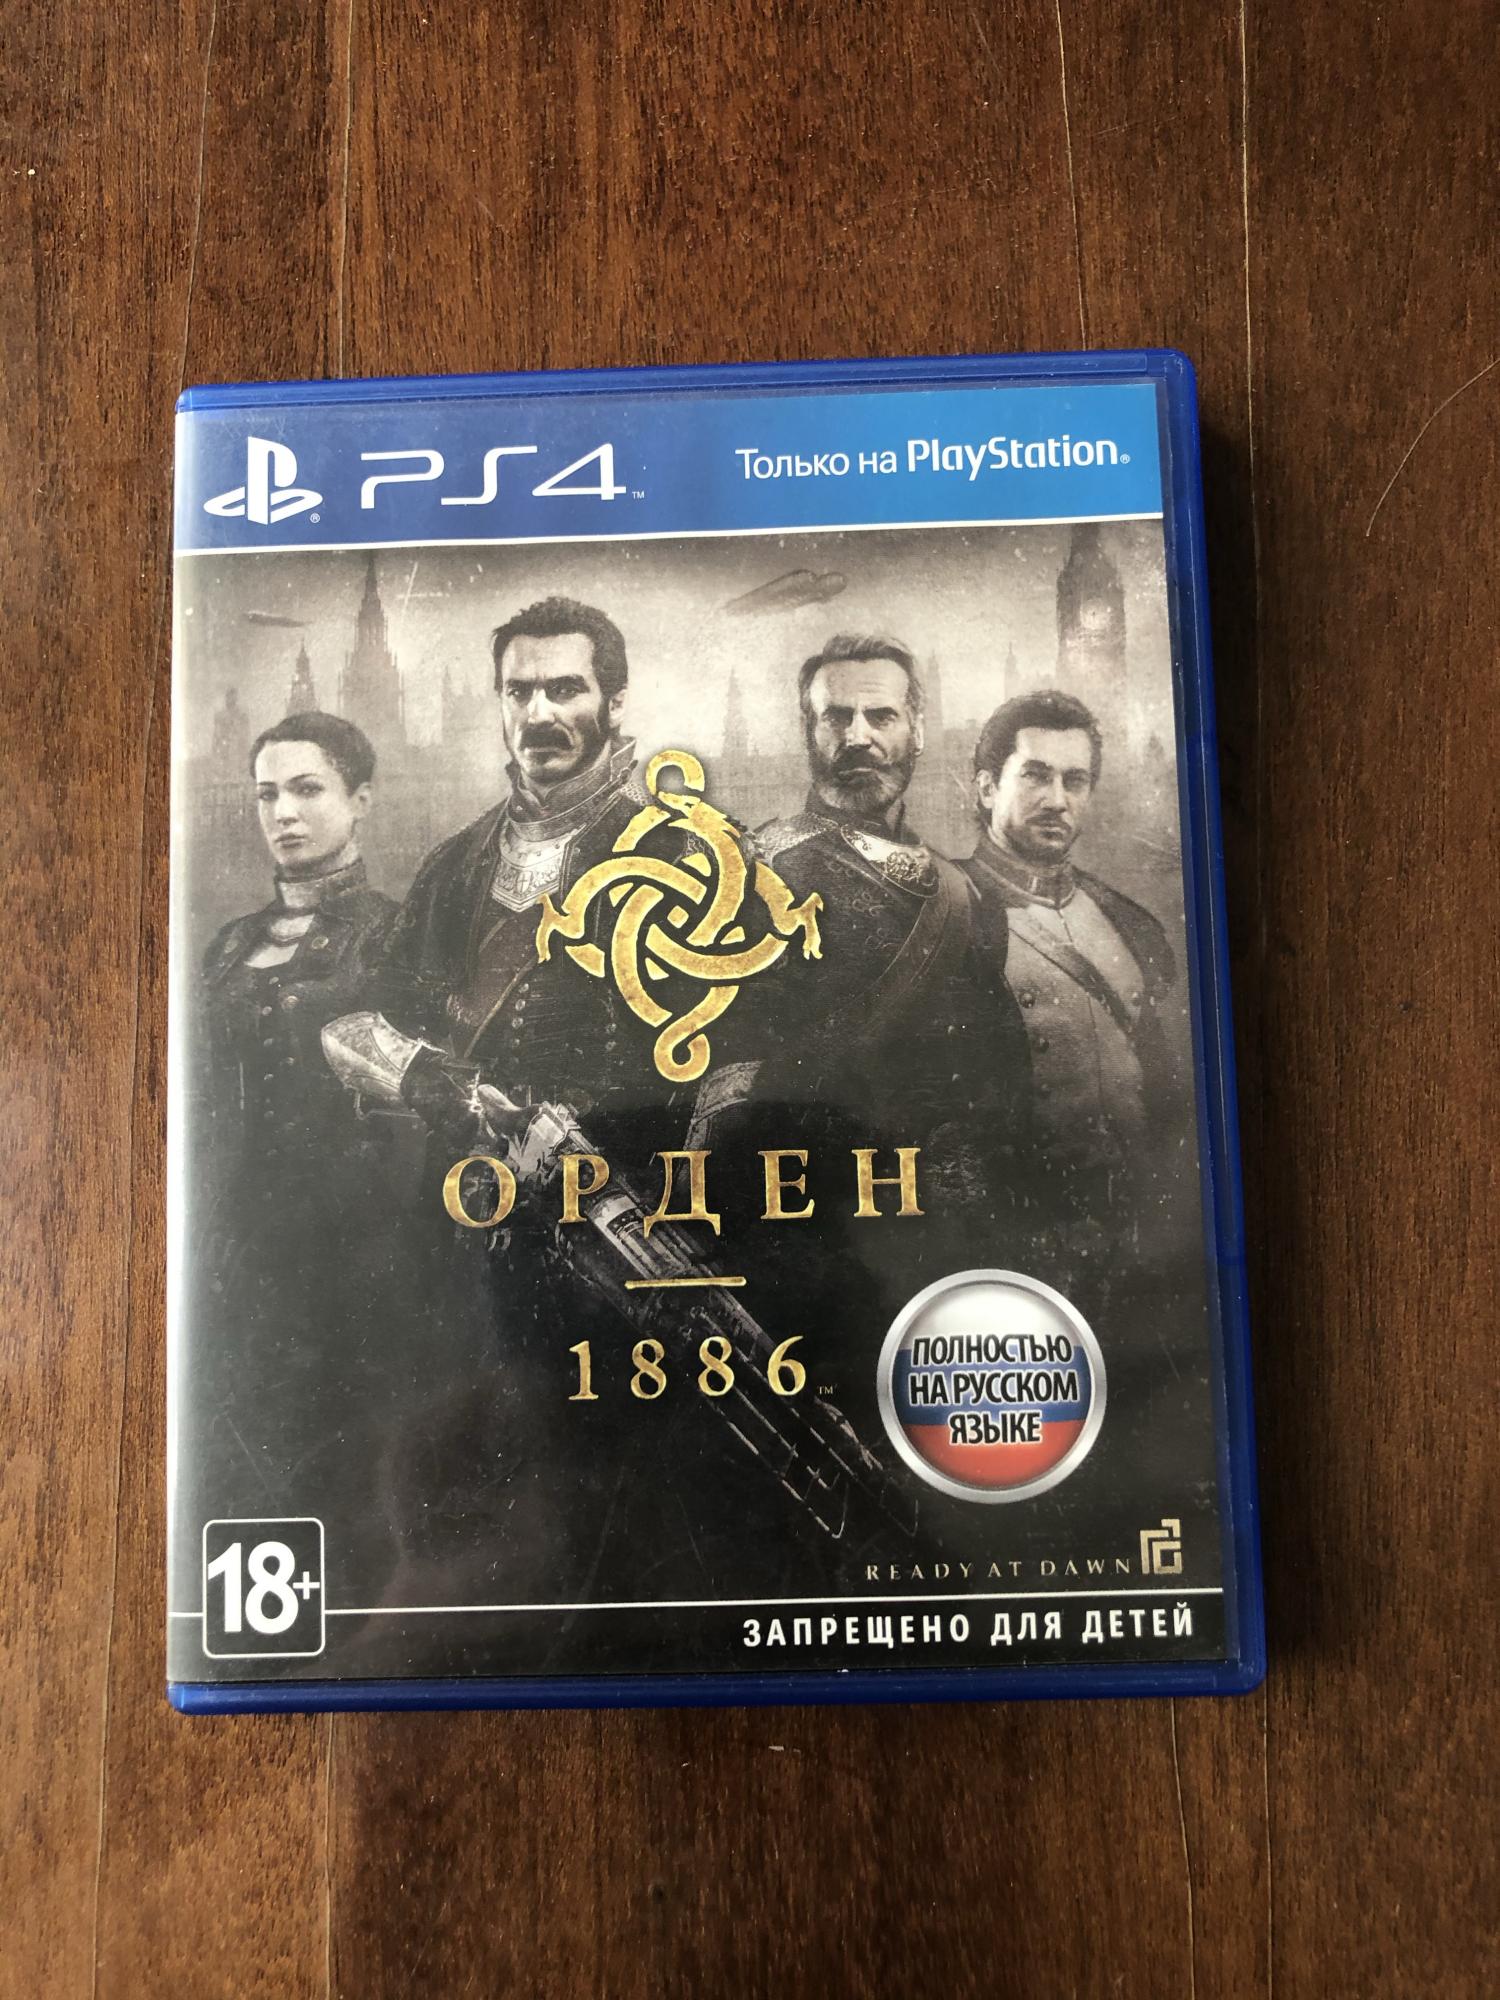 Орден 1886 ps4. Order 1886 ps4. Order 1886 диск. Order 1886 ps4 диск.